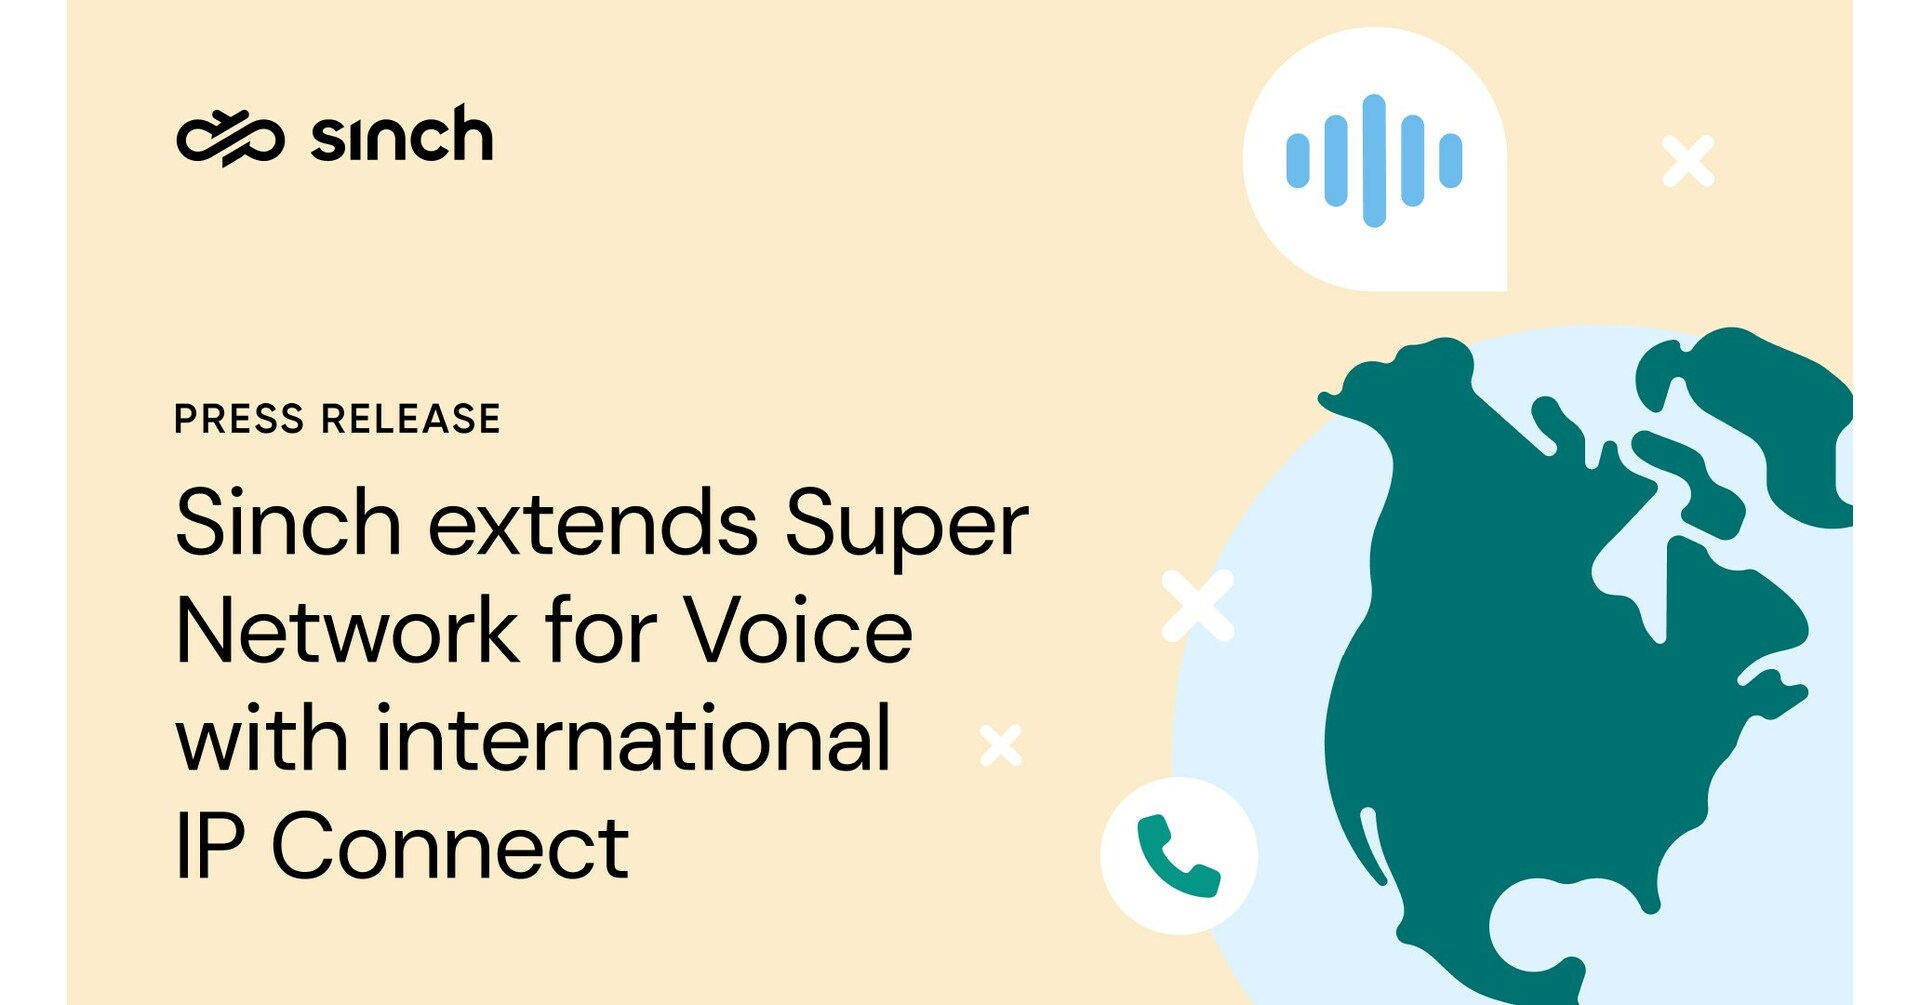 Sinch expands Super Network for Voice with international IP Connect